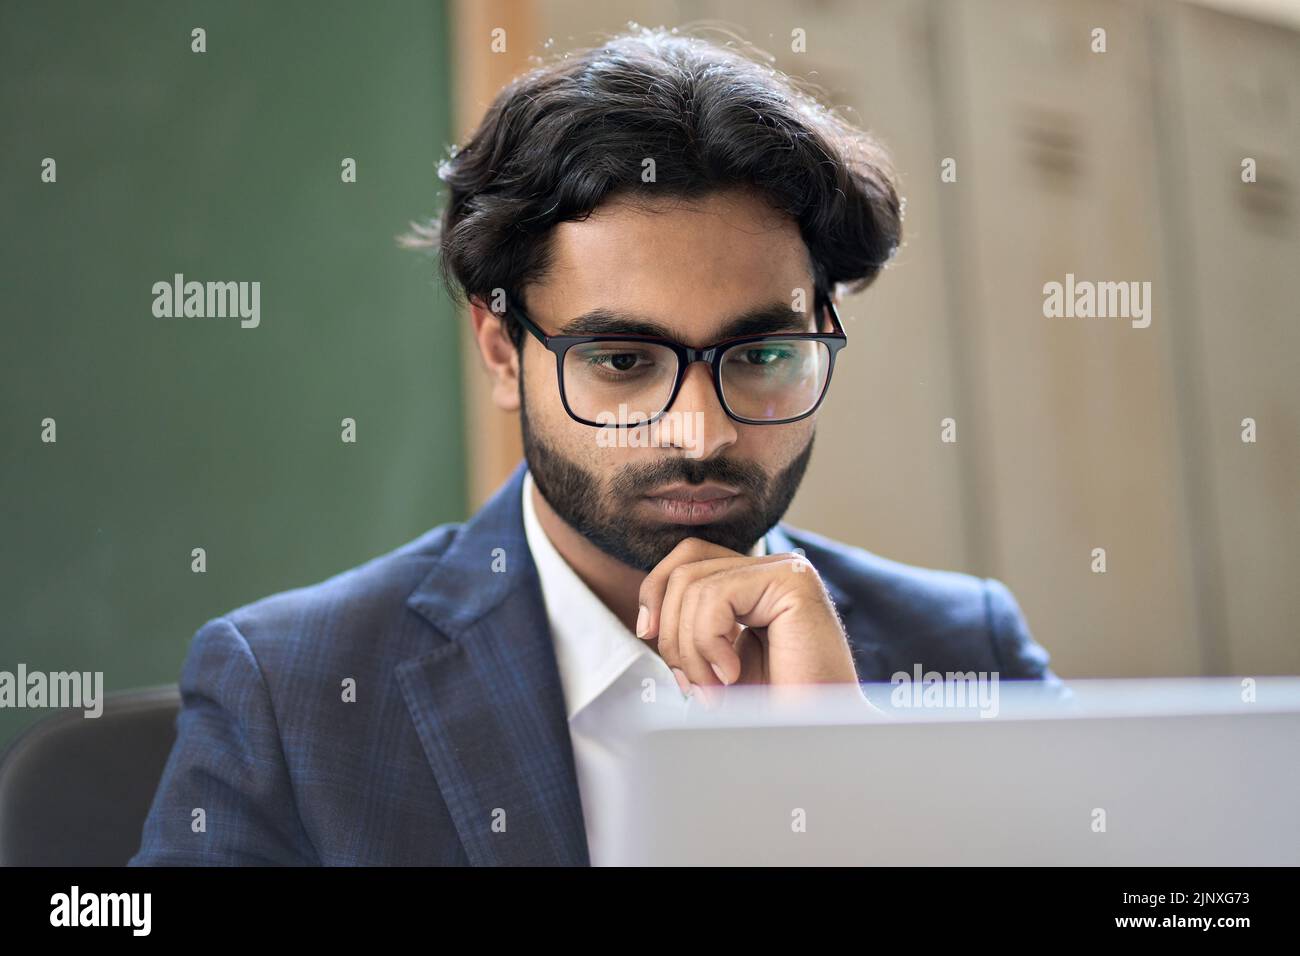 Thoughtful young indian business man analyzing market data, looking at computer. Stock Photo